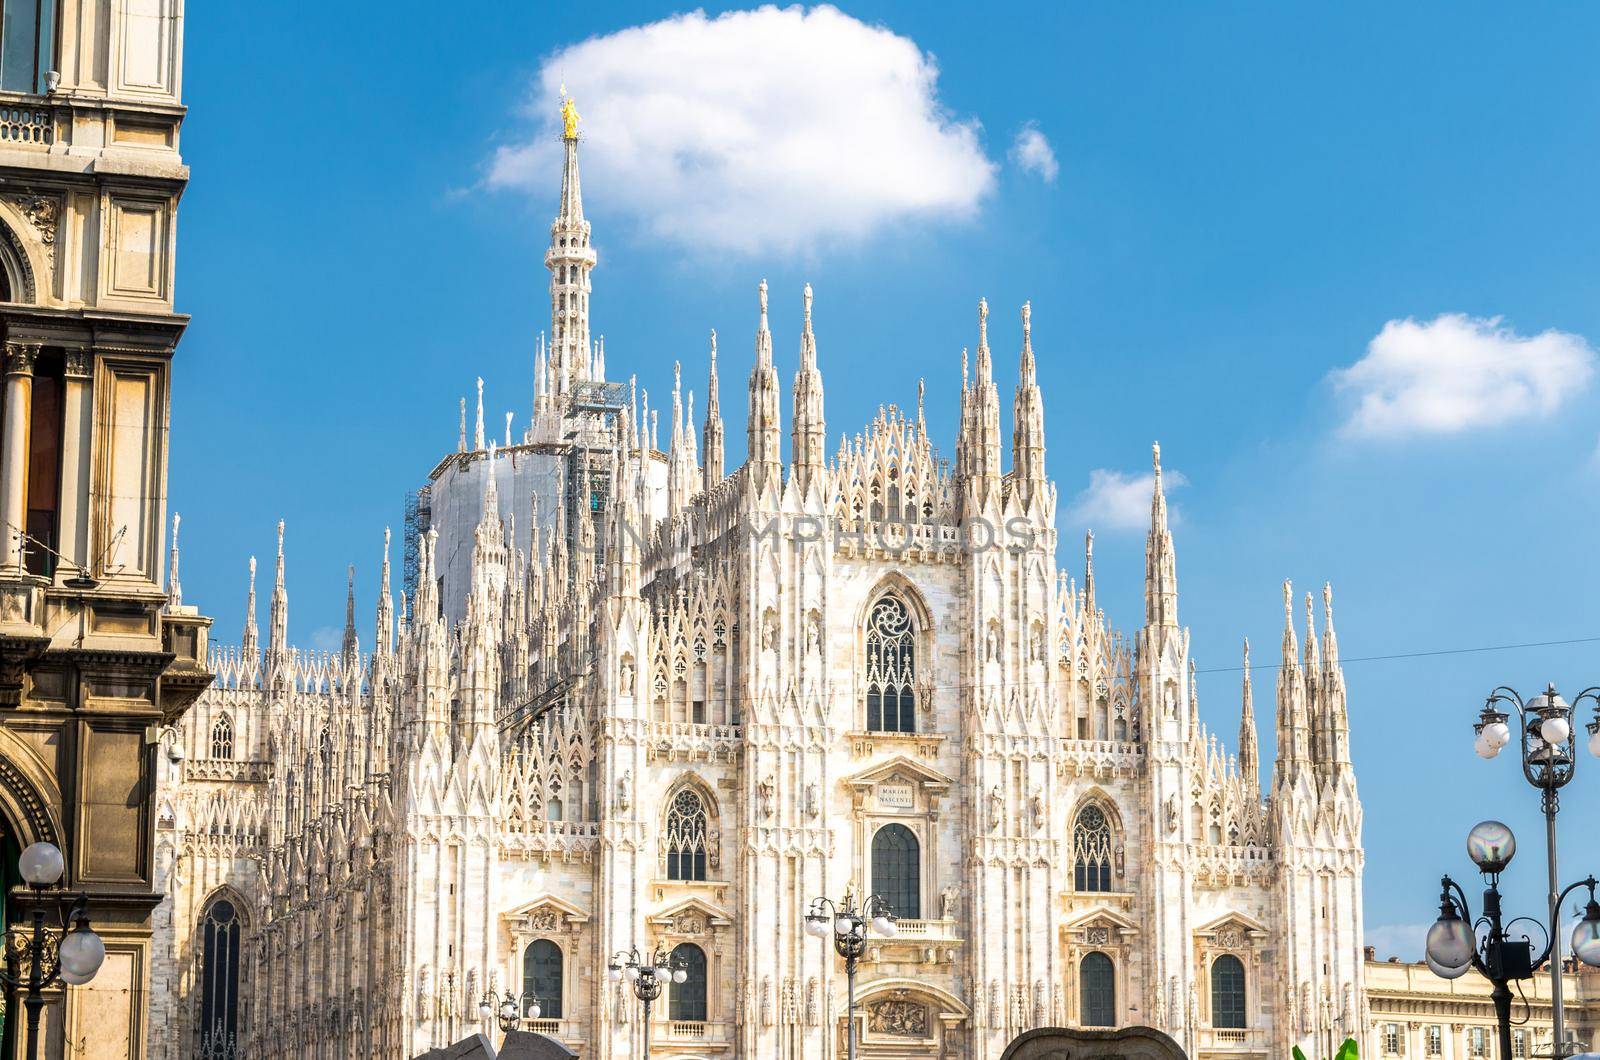 Duomo di Milano cathedral facade with white walls, spires, mouldings and stucco work on Piazza del Duomo square, view from Piazza Mercanti with blue sky background, Milan historical city centre, Italy